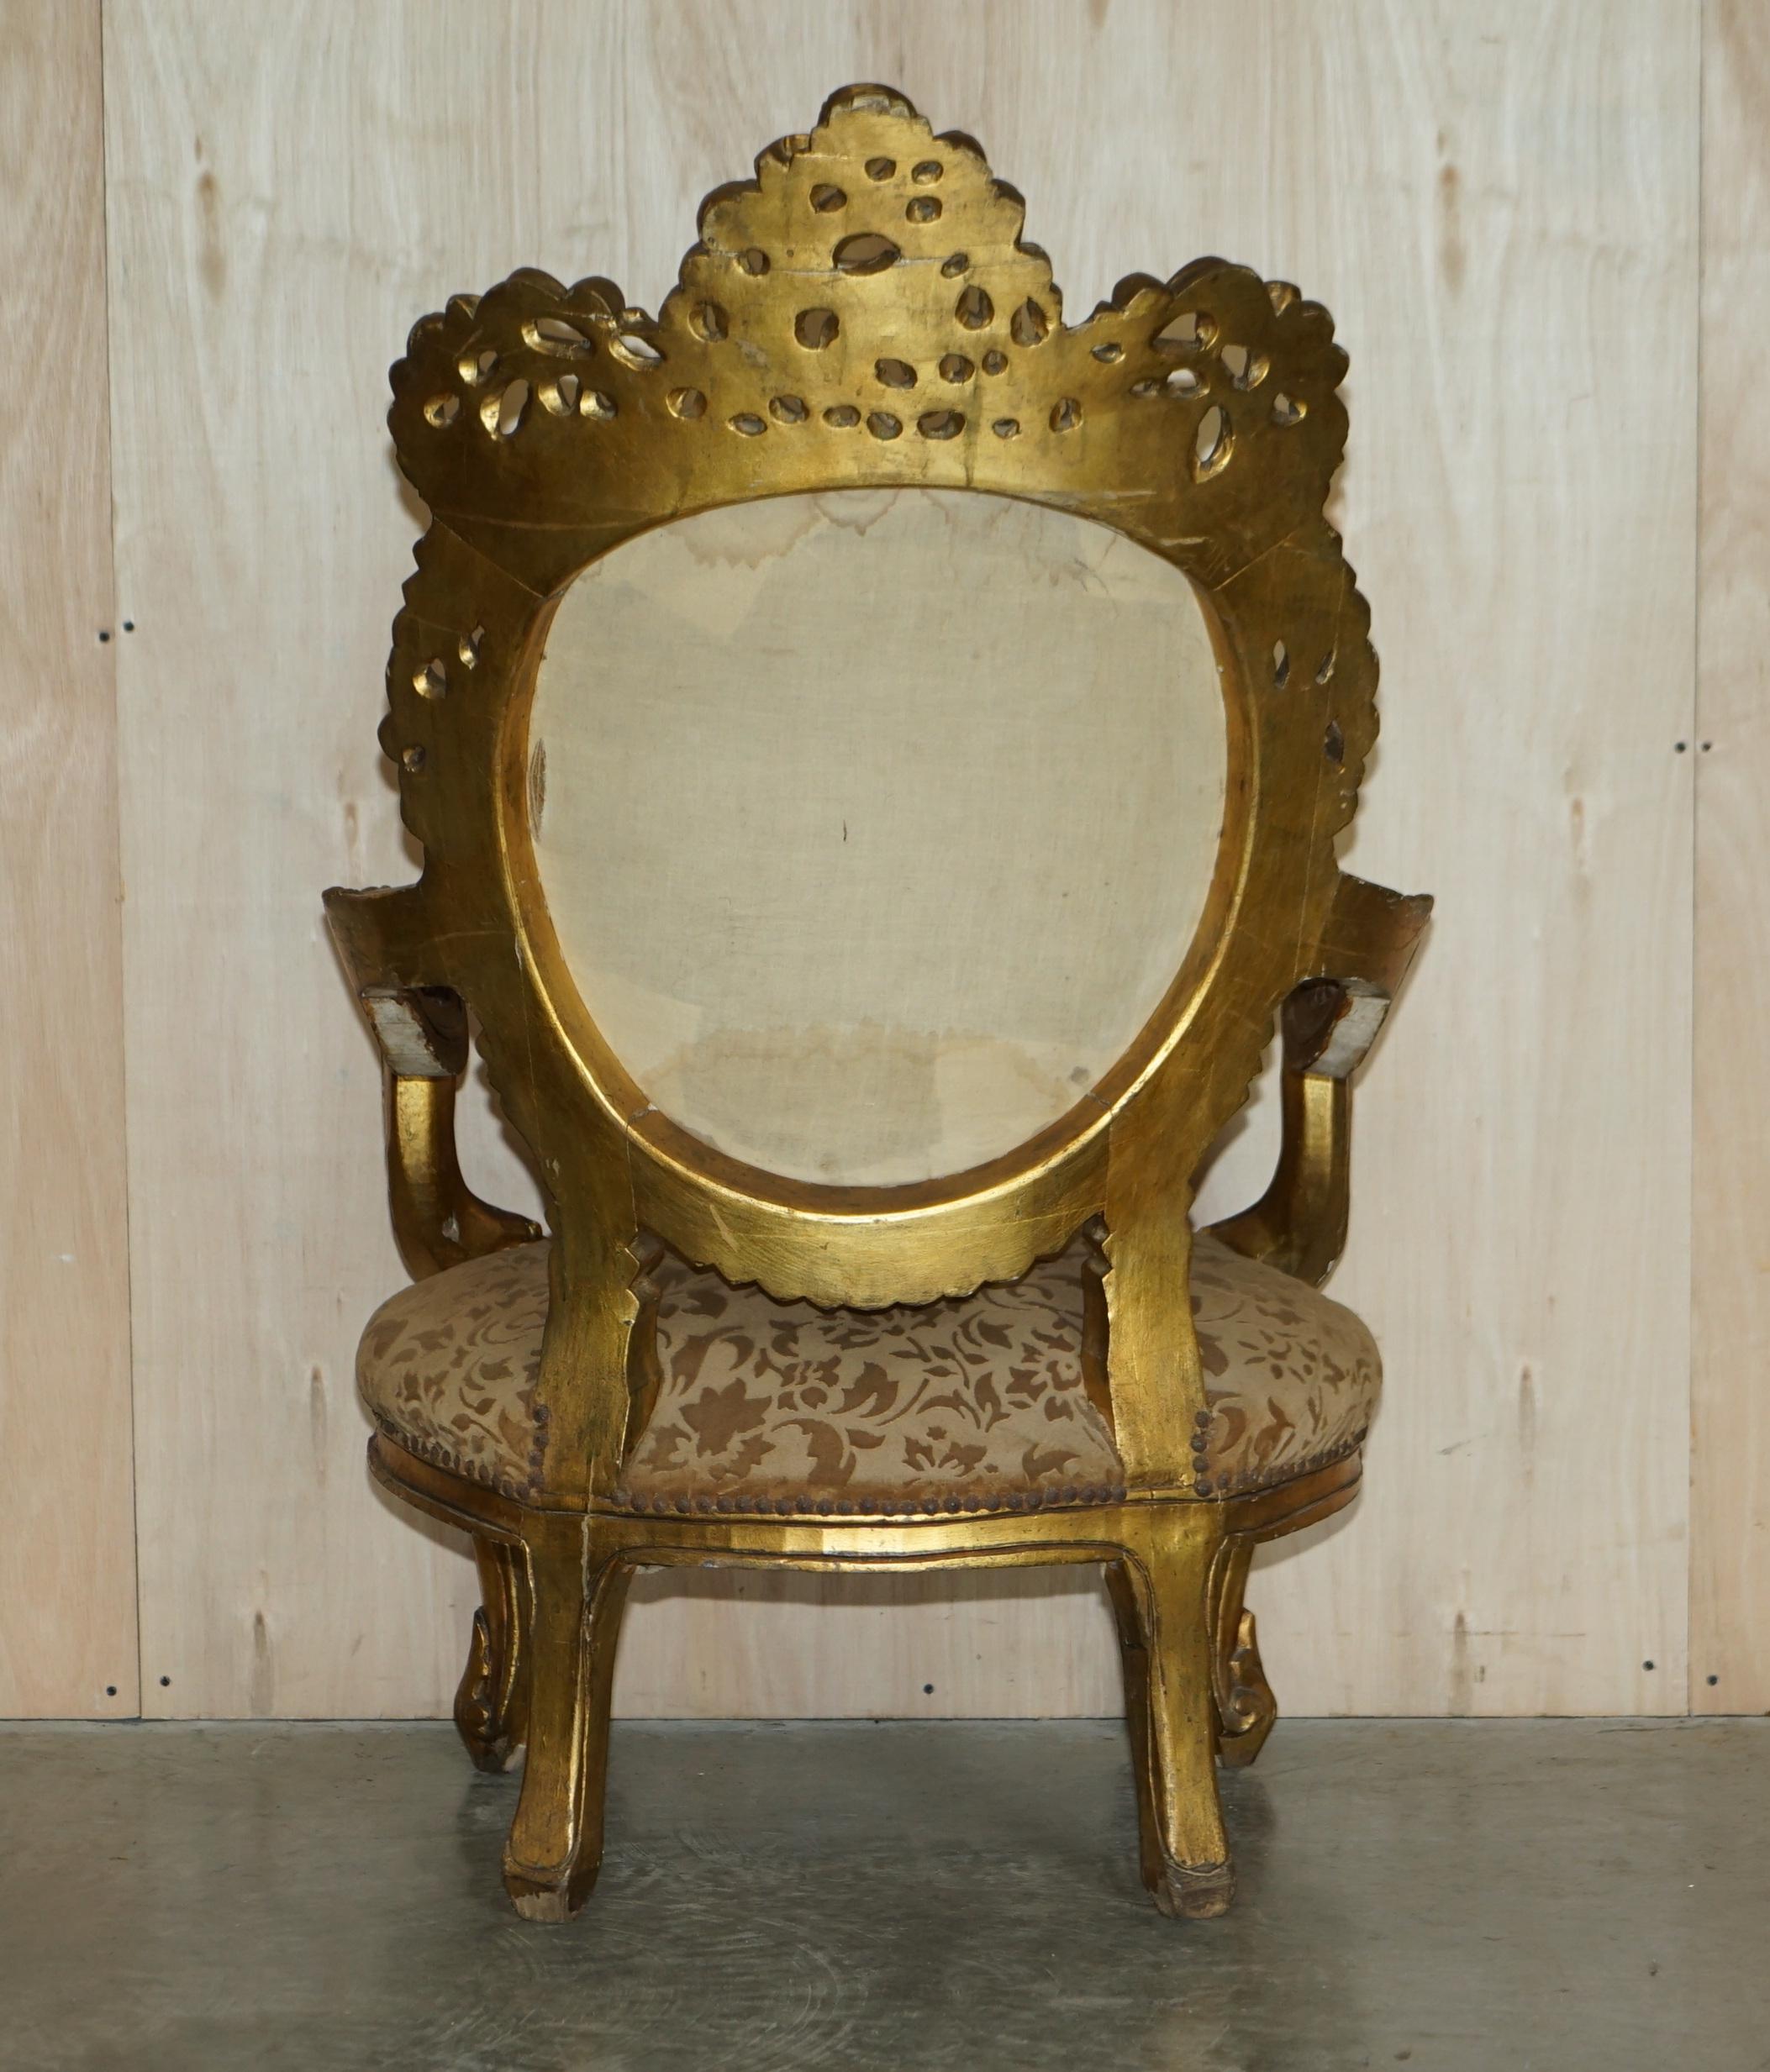 PAIR OF ANTIQUE ORIGINAL GiLTWOOD FINISH FRENCH LOUIS XV FAUTEUILS ARMCHAIRS For Sale 5